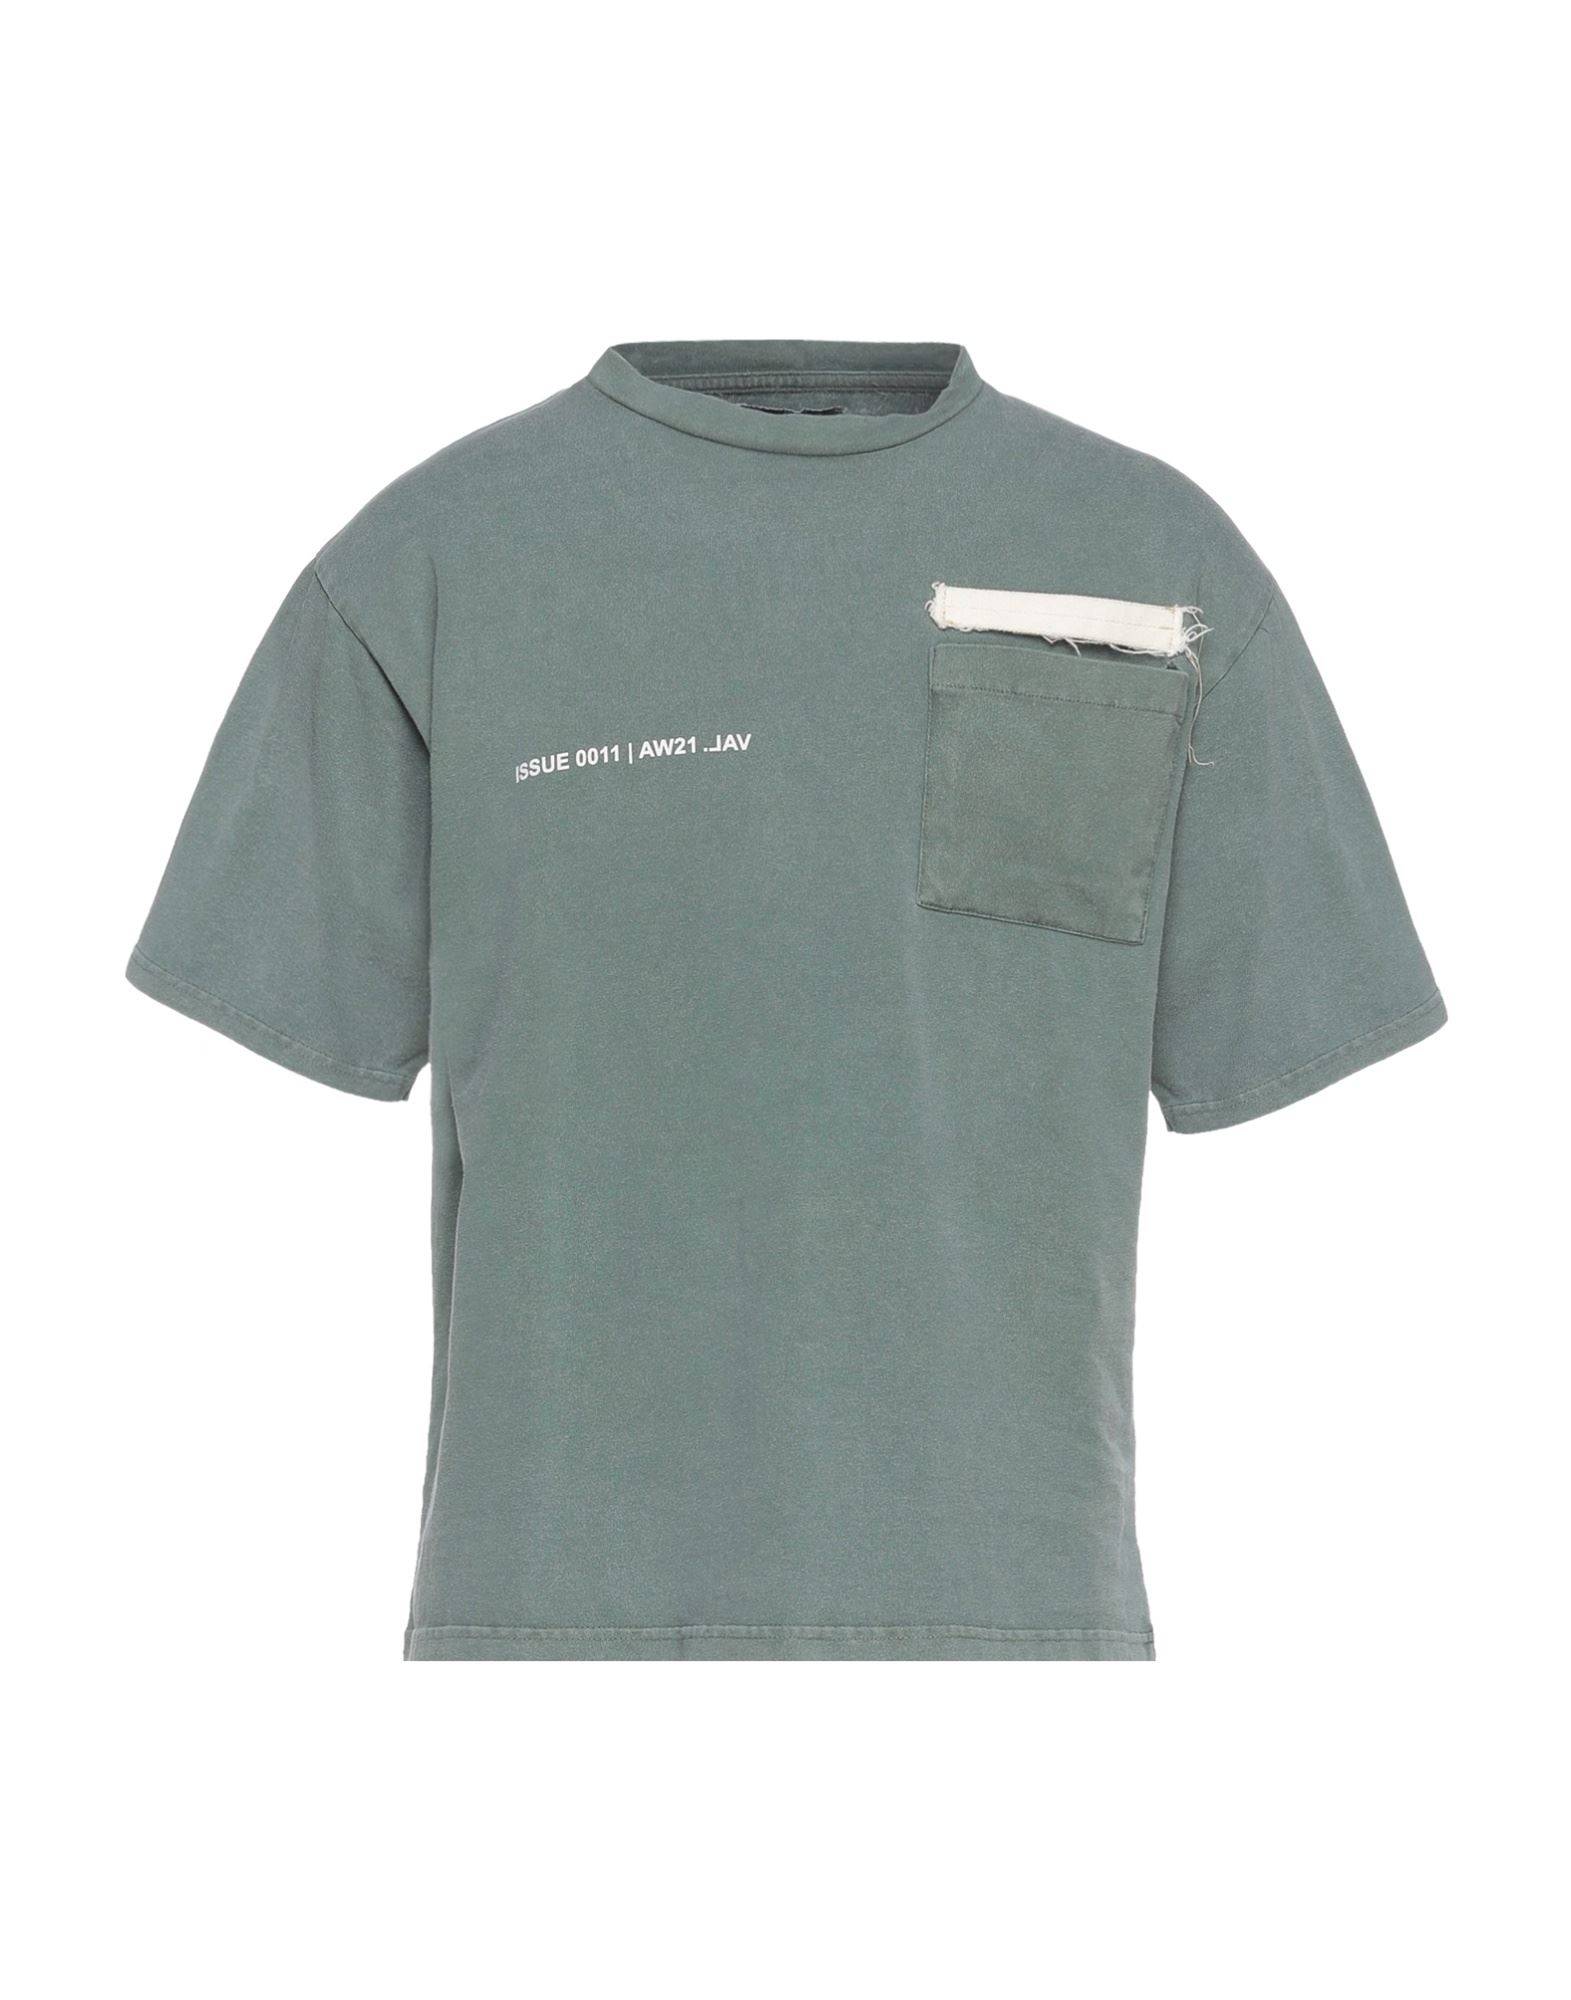 Val Kristopher T-shirts In Sage Green